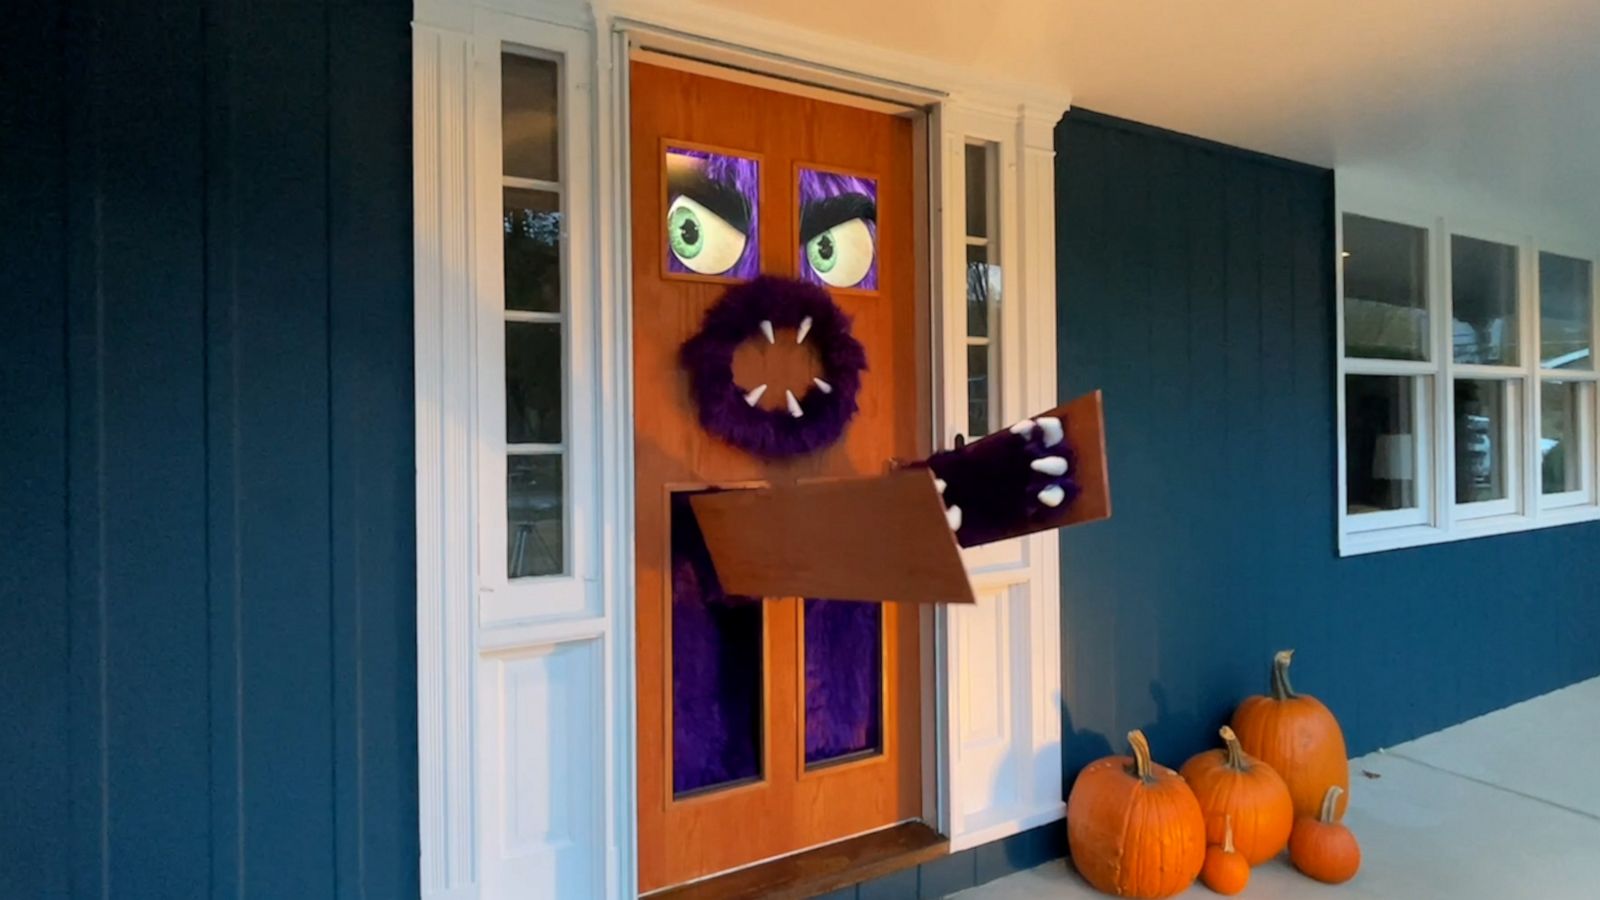 VIDEO: This monst-door puts the ‘trick’ in ‘trick-or-treating’